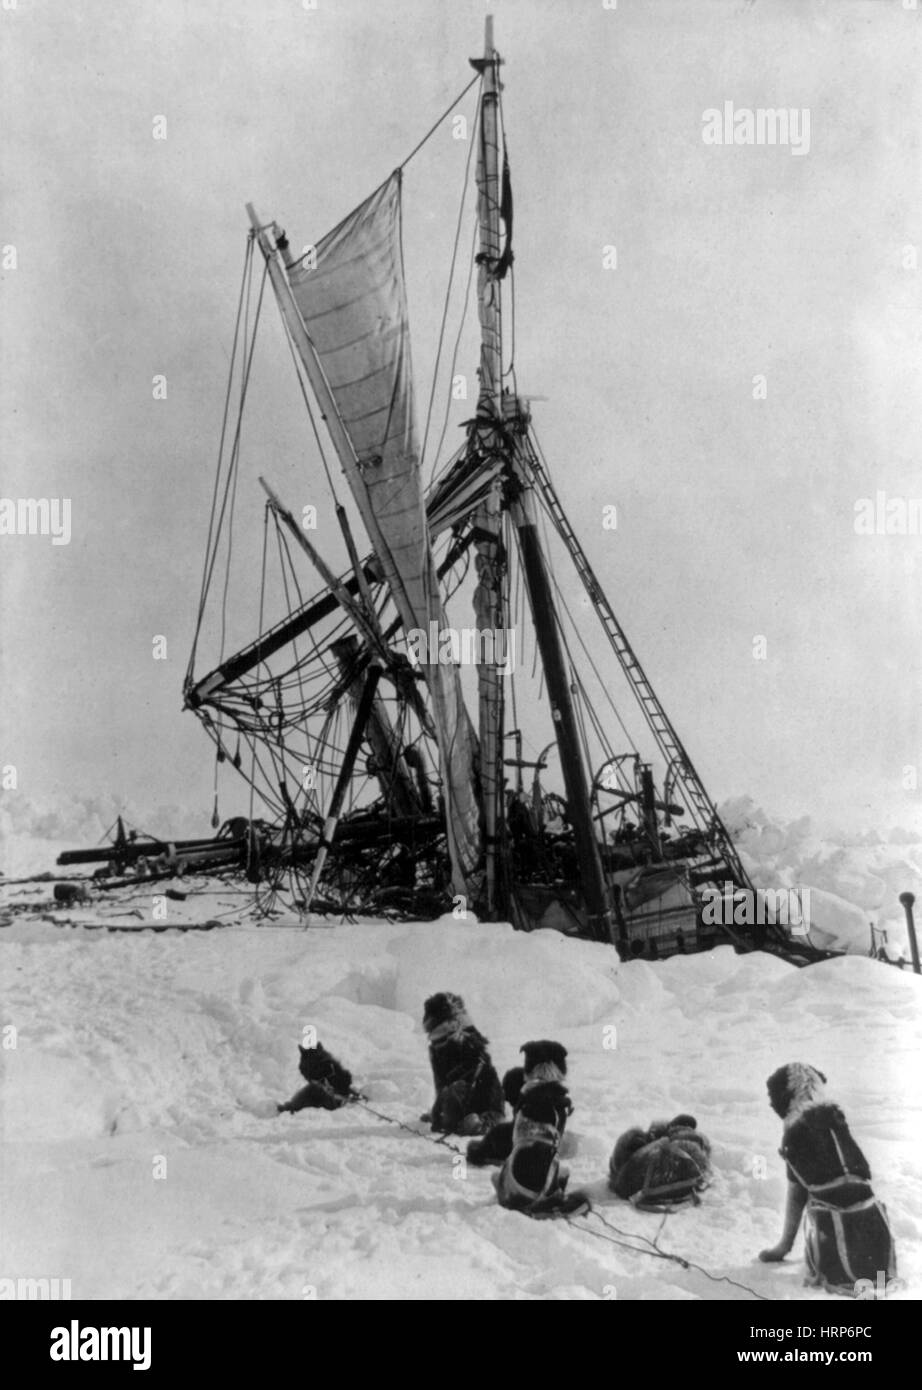 Shackleton's Endurance Trapped in Pack Ice, 1915 Stock Photo - Alamy